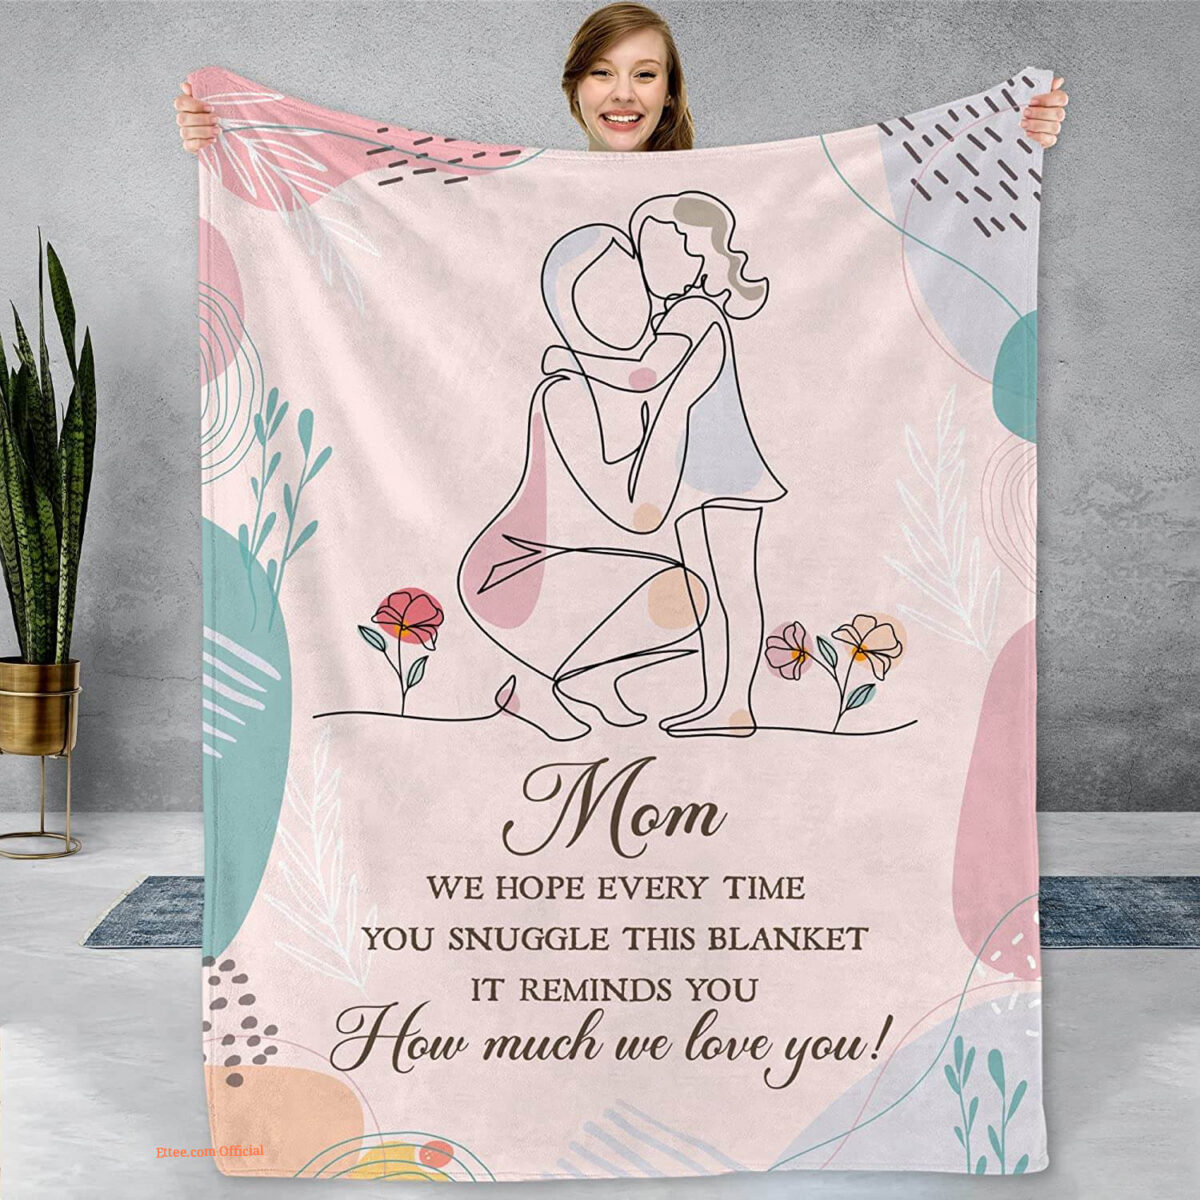 Fastpeace Gifts for Mom from Daughter Son.Blanket for Mom Mother.Birthday Christmas Newyear Gifts Idea.Throw Blankets for Women Blanket - Super King - Ettee